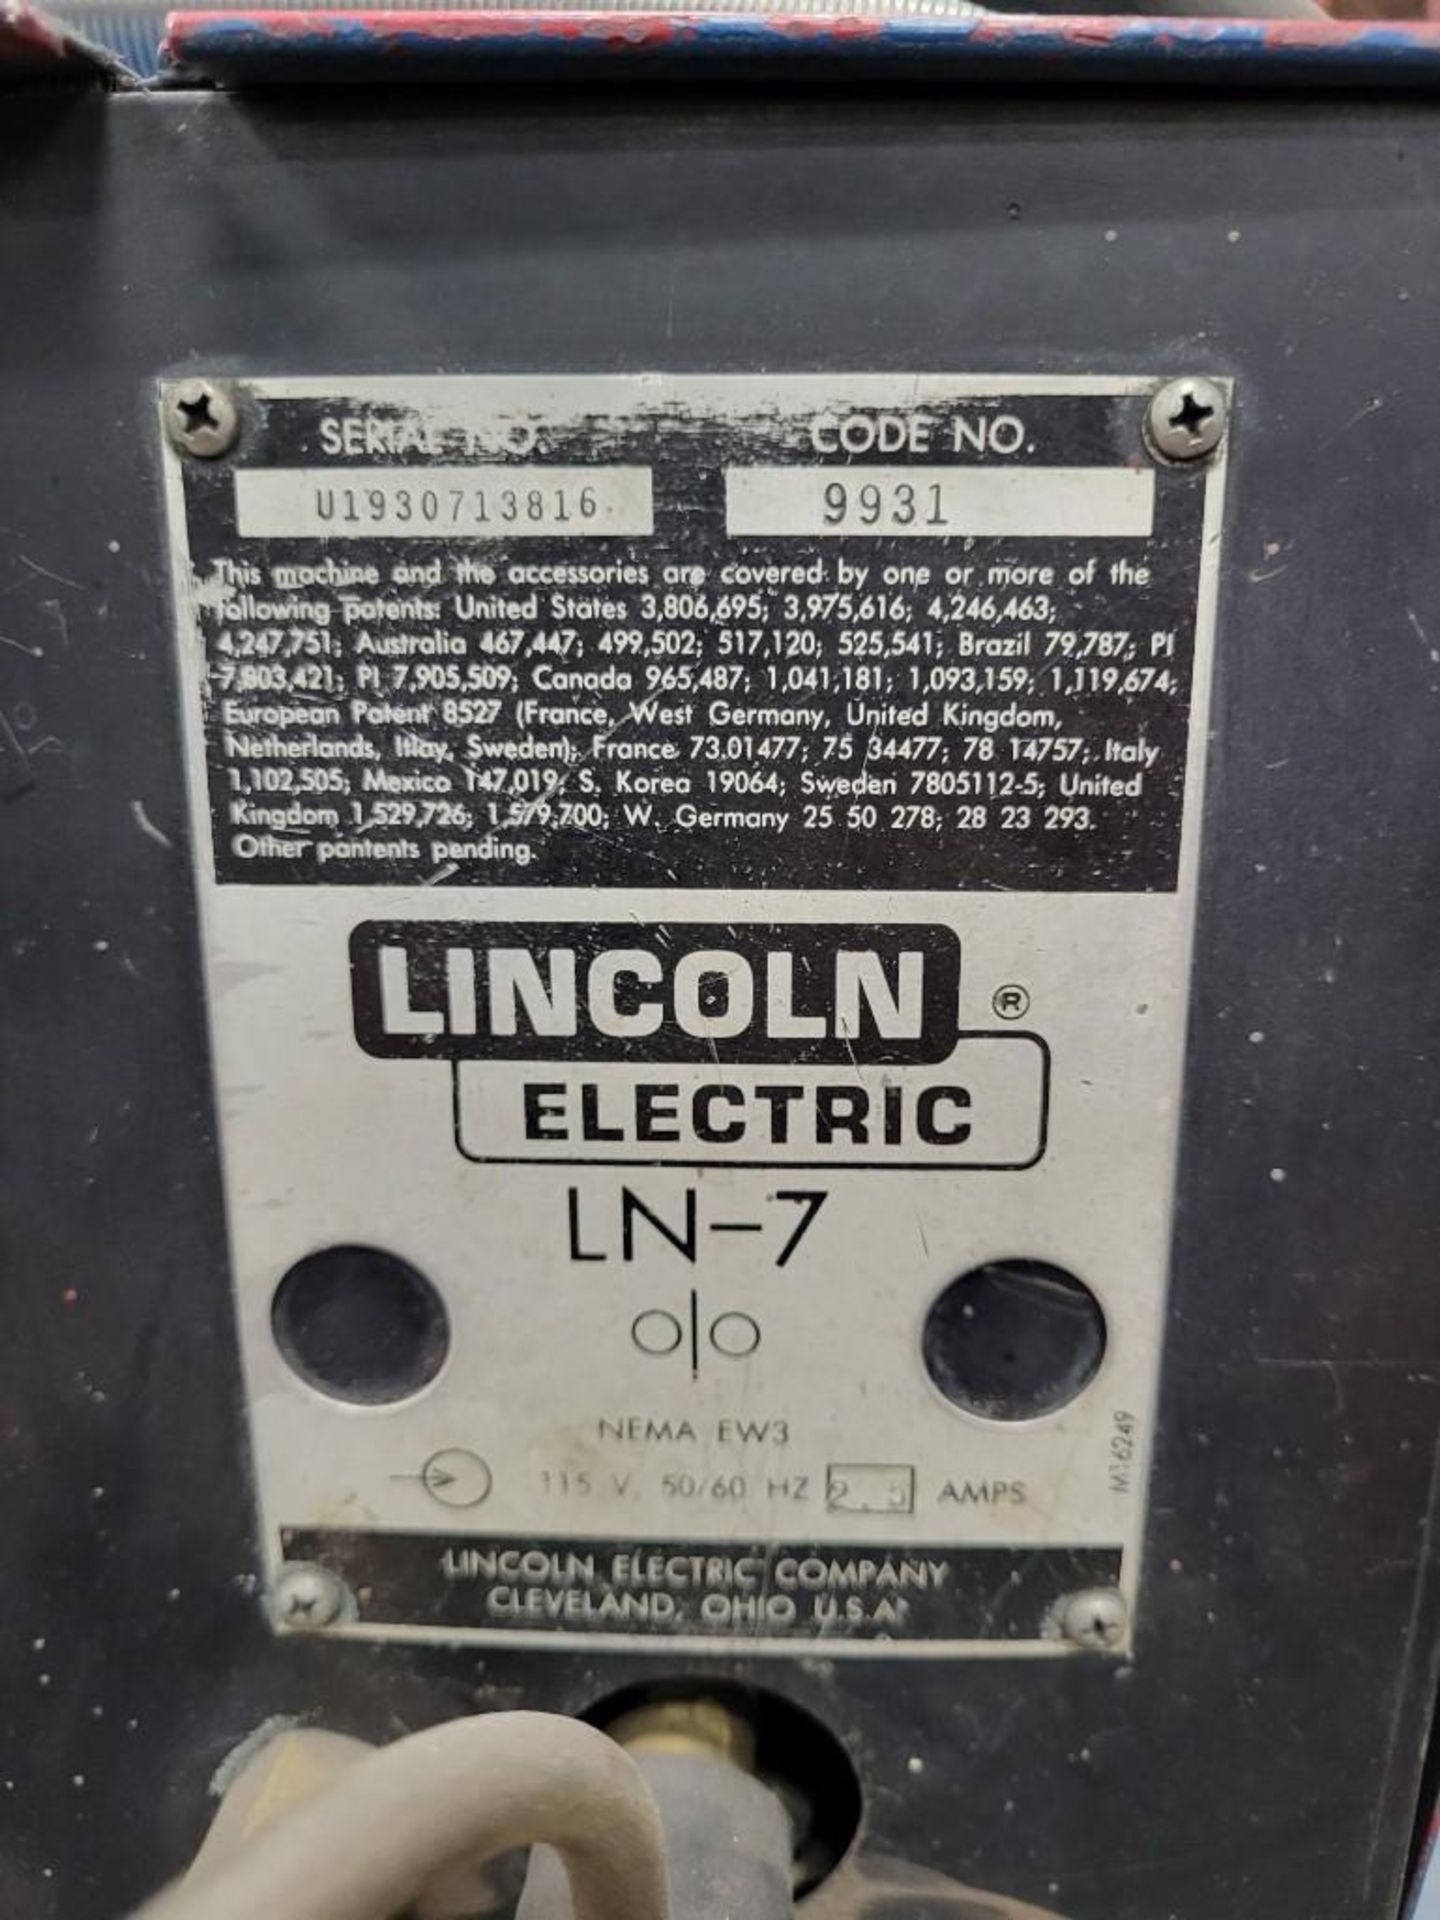 LINCOLN ELECTRIC IDEALARC CV-400 MIG WELDER WITH LN-7 WIRE FEEDER - Image 11 of 11